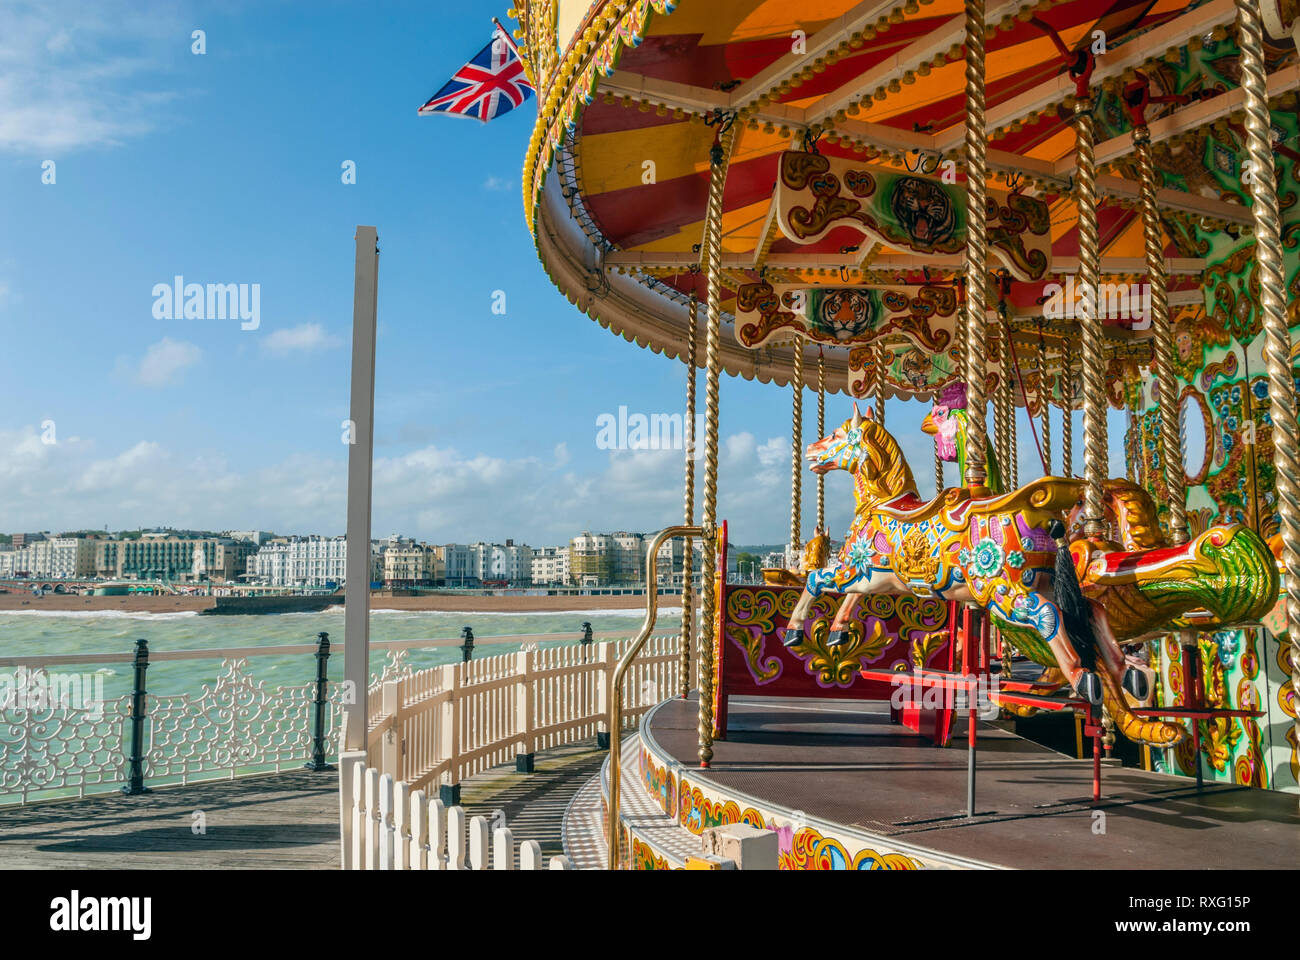 Colourful Carousel at Brighton Pier, East Sussex, South England, UK Stock Photo